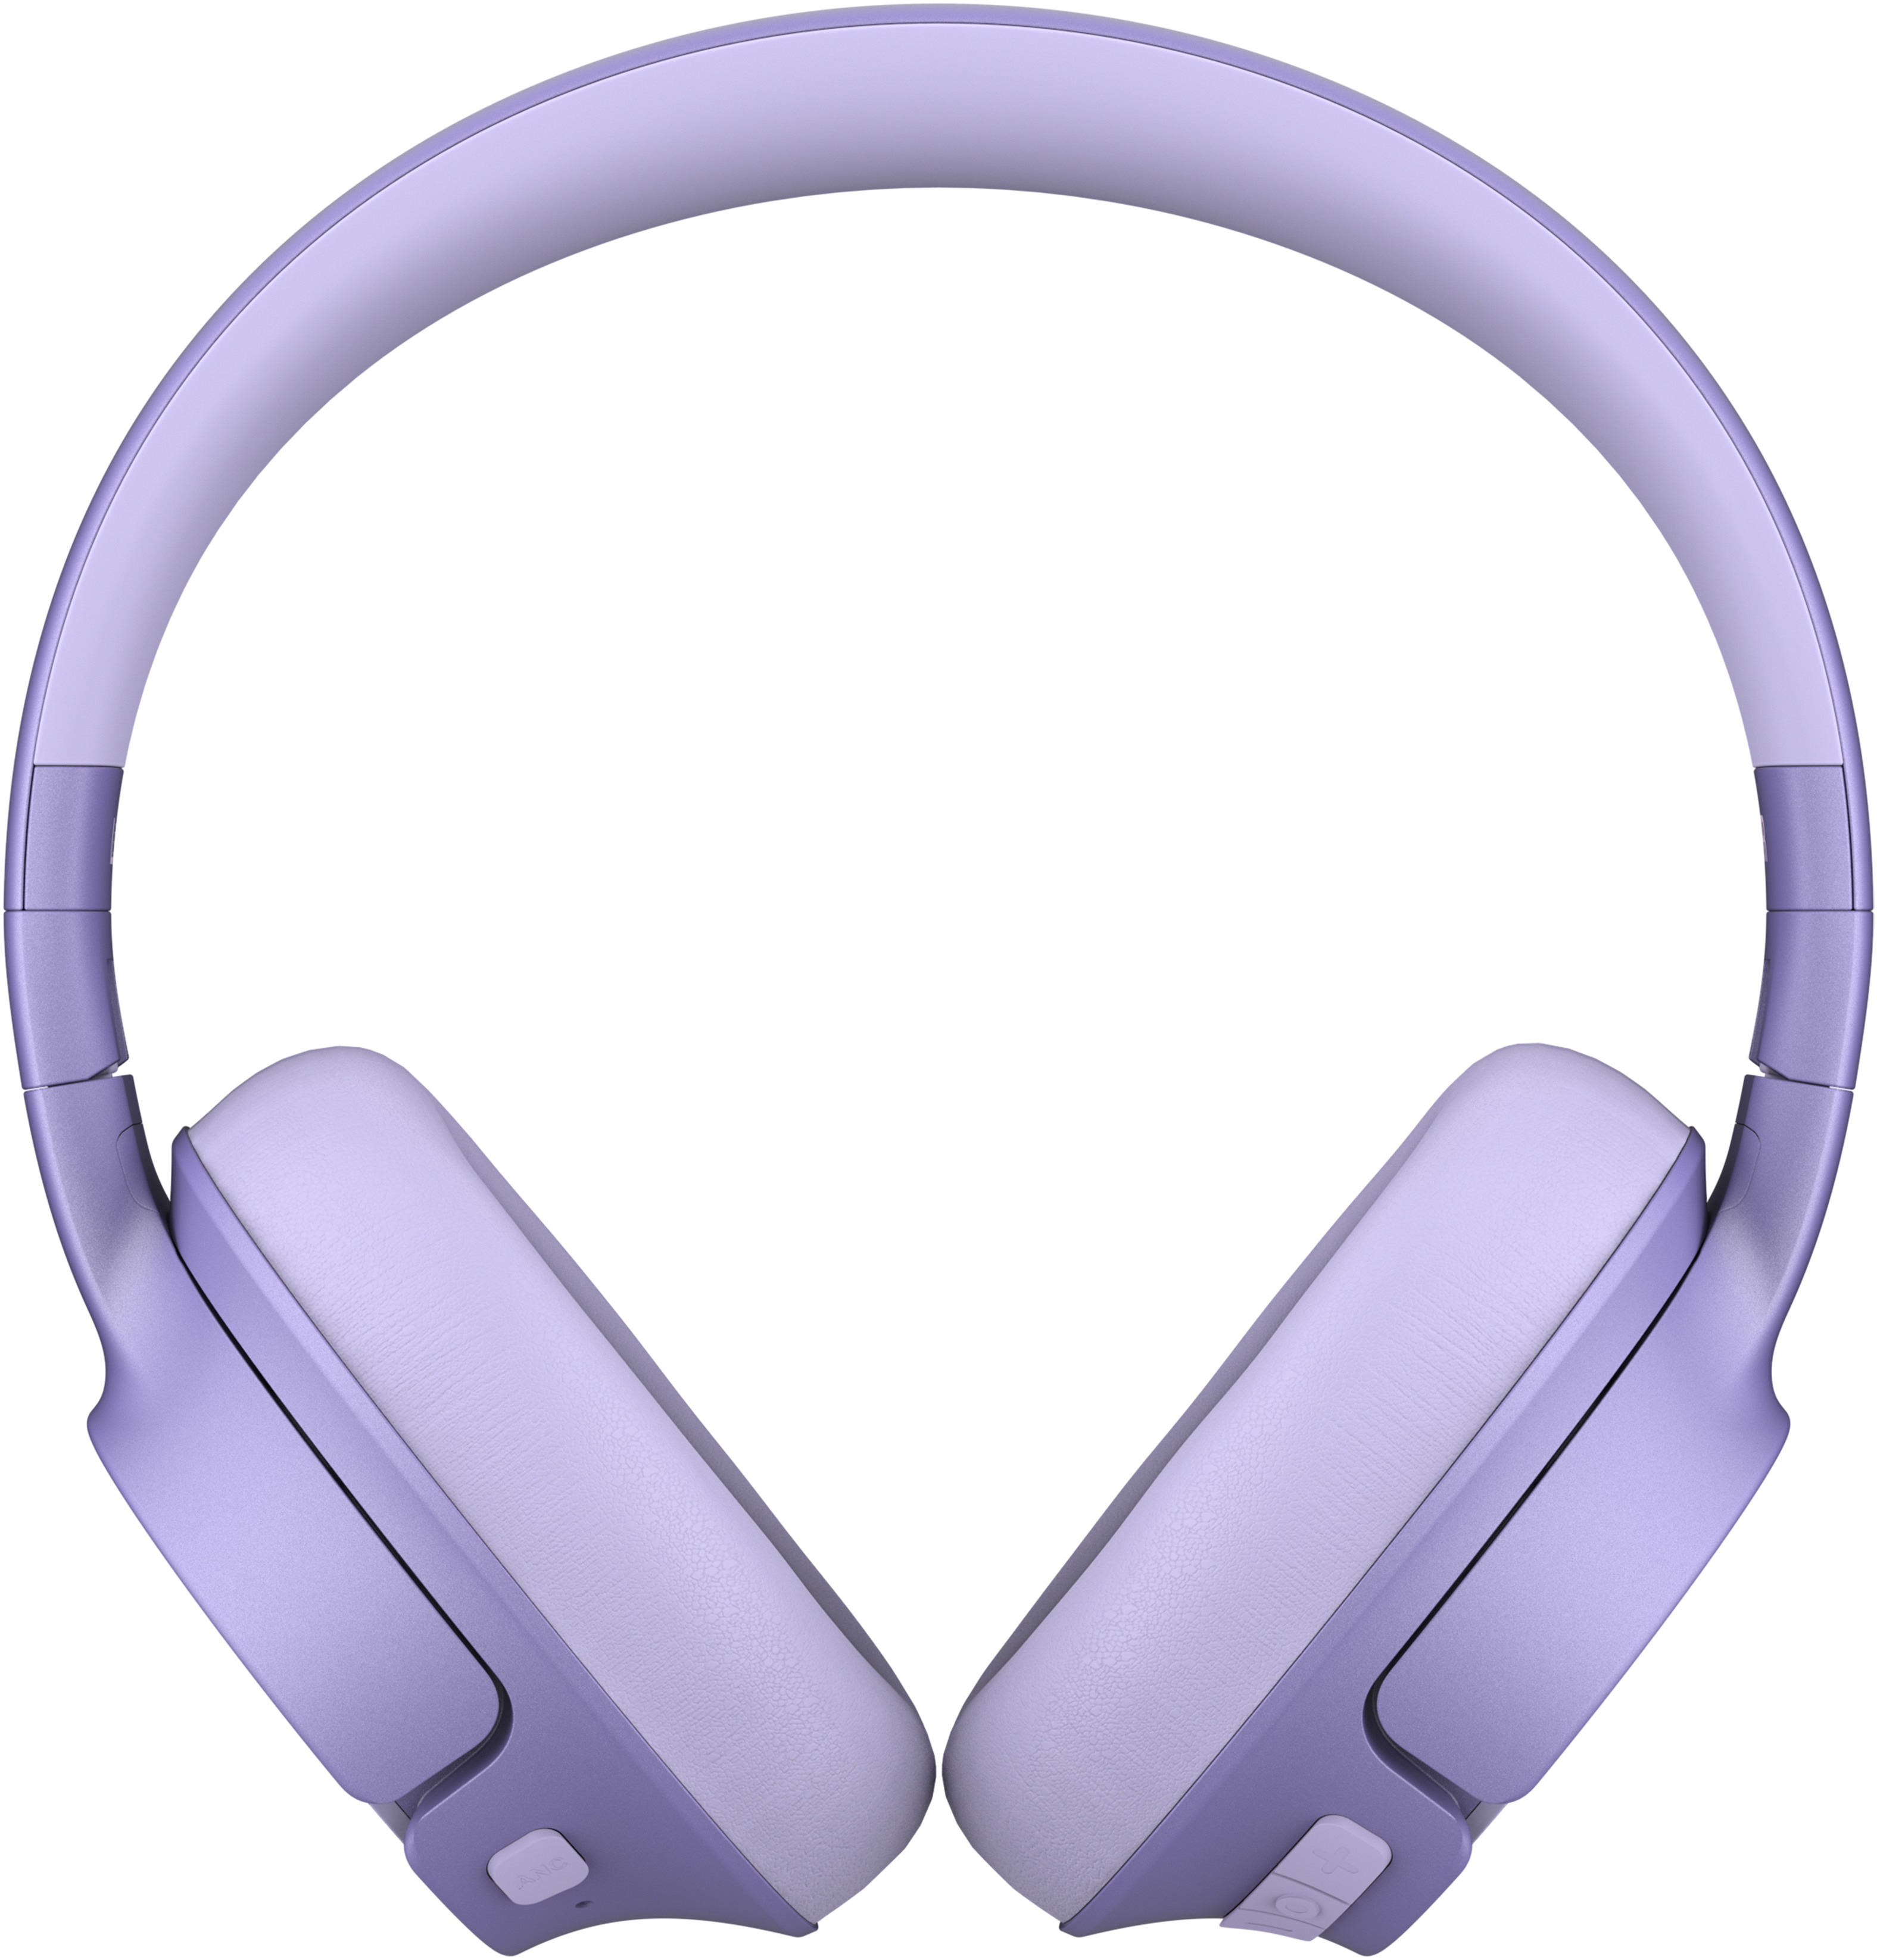 FRESH'N REBEL Clam Fuse - Wless over-ear 3HP3300DL Dreamy Lilac with Hybrid ANC